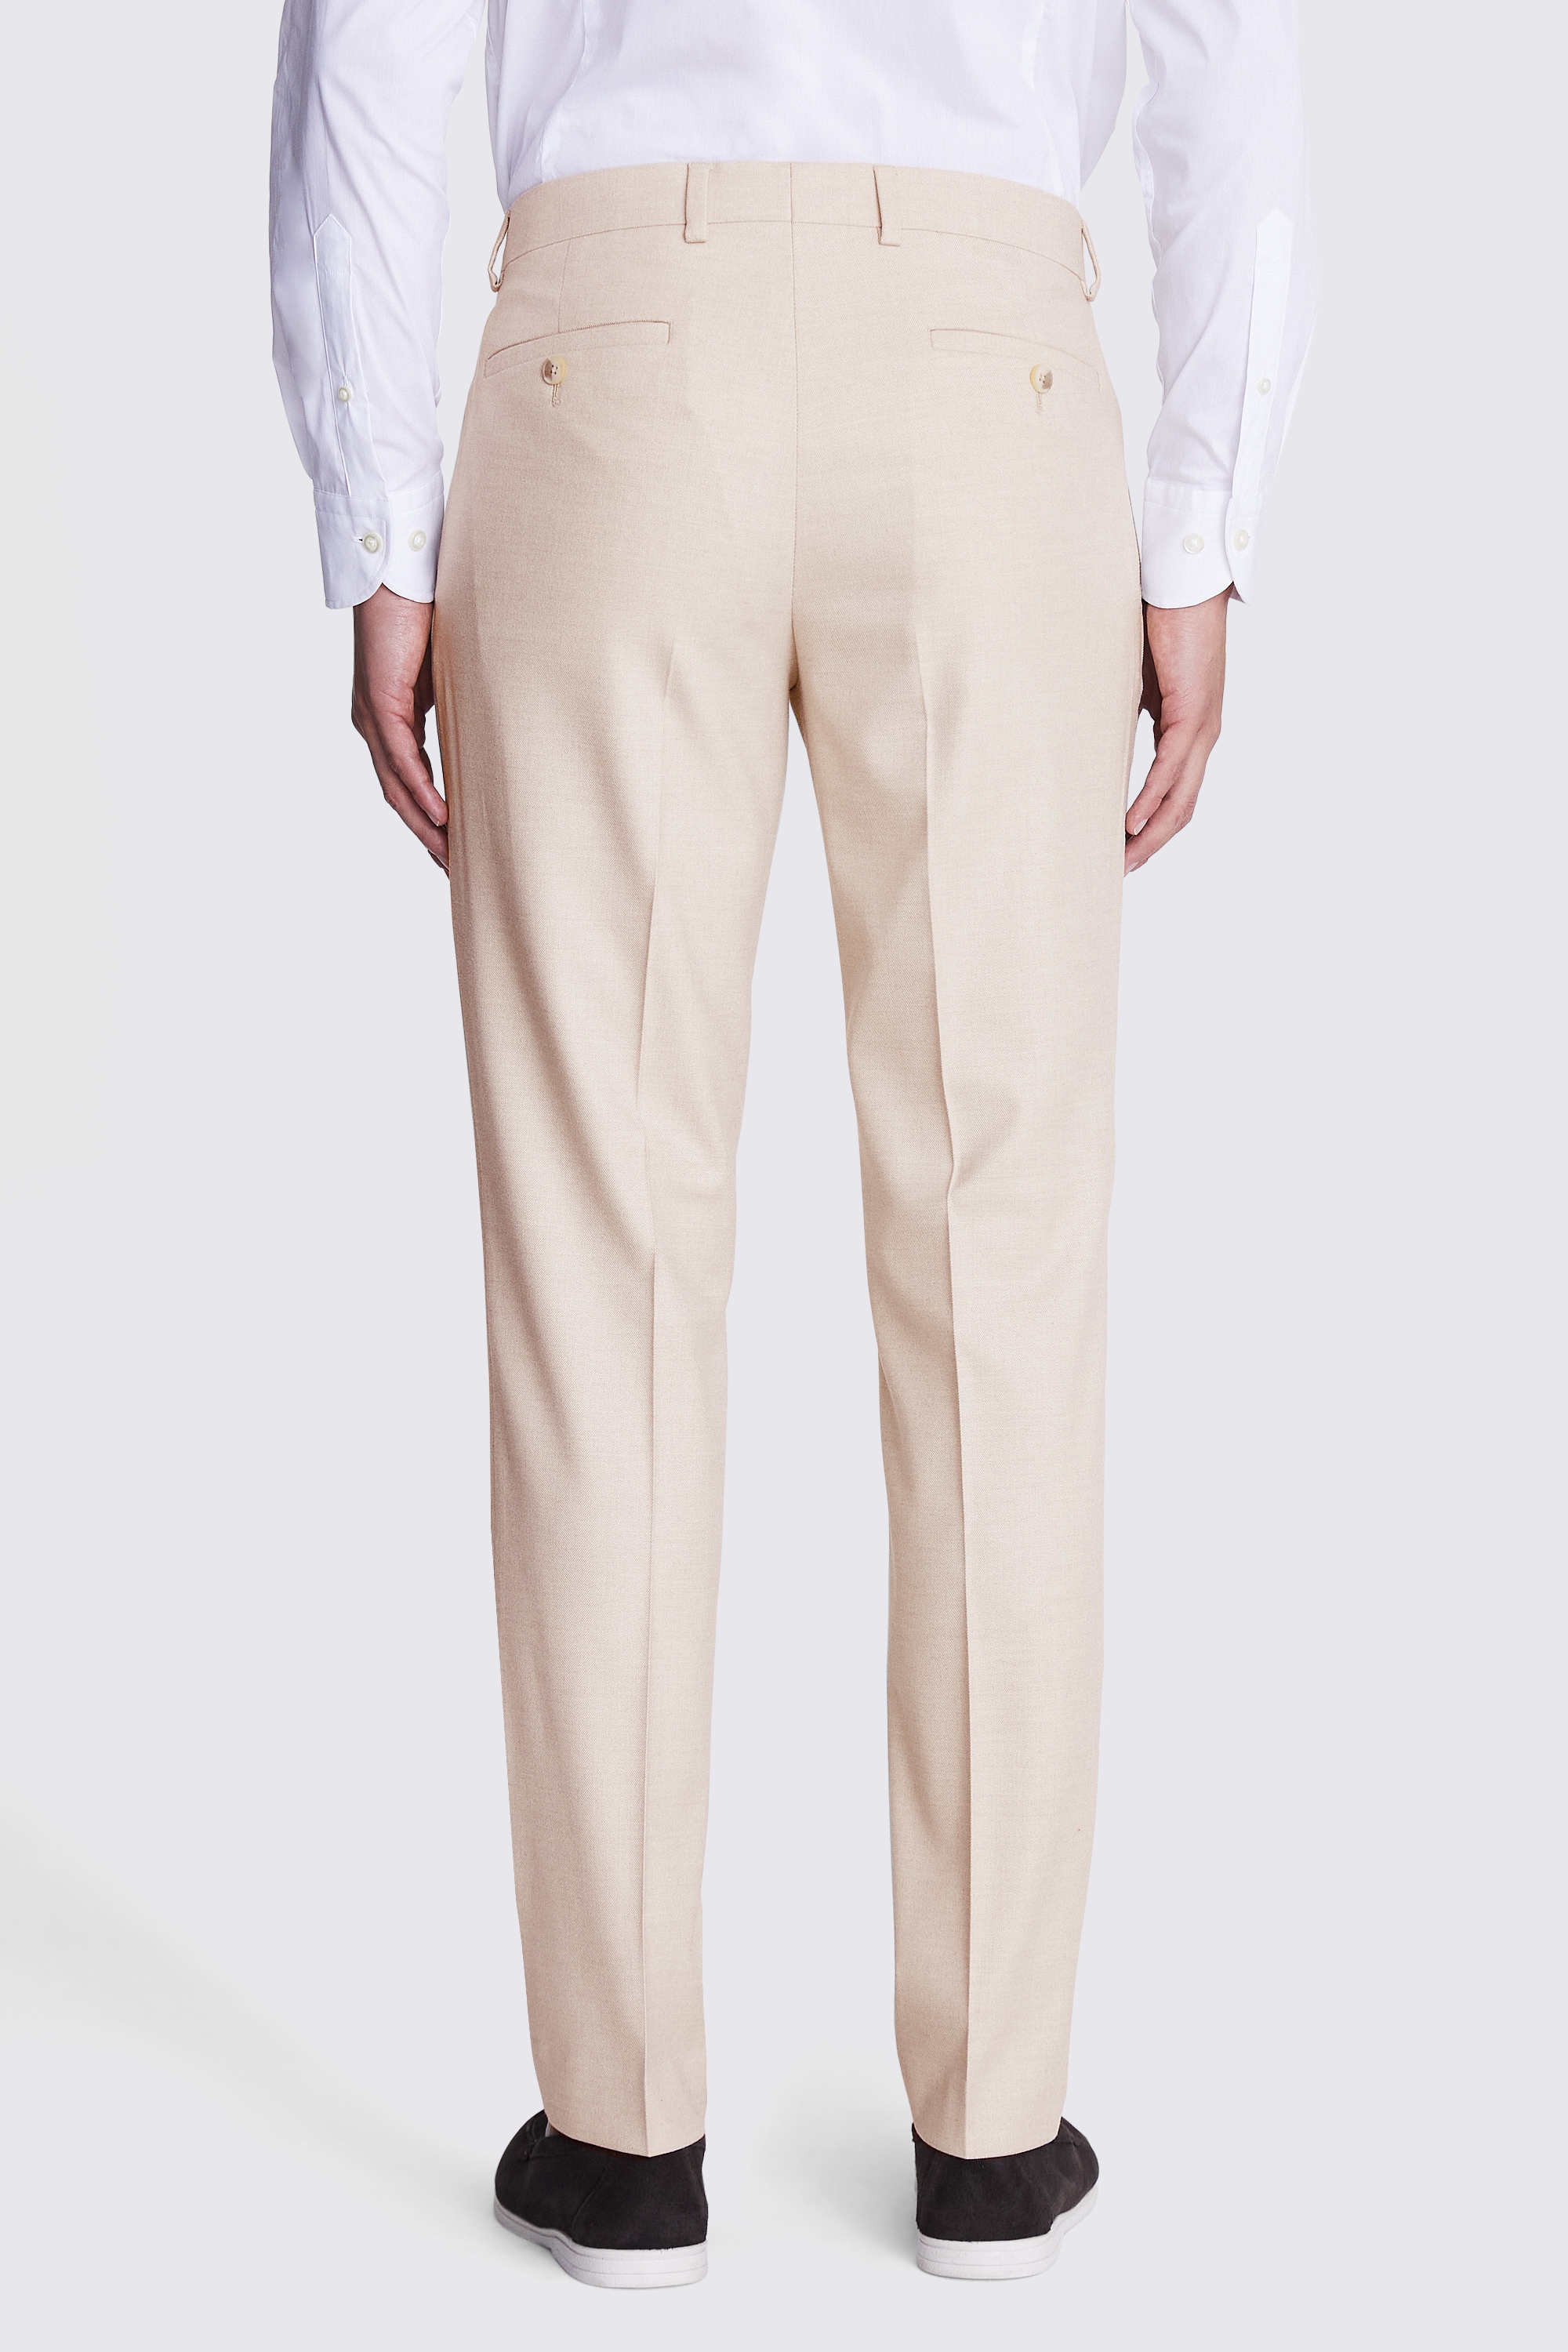 Slim Fit Light Camel Trousers | Buy Online at Moss